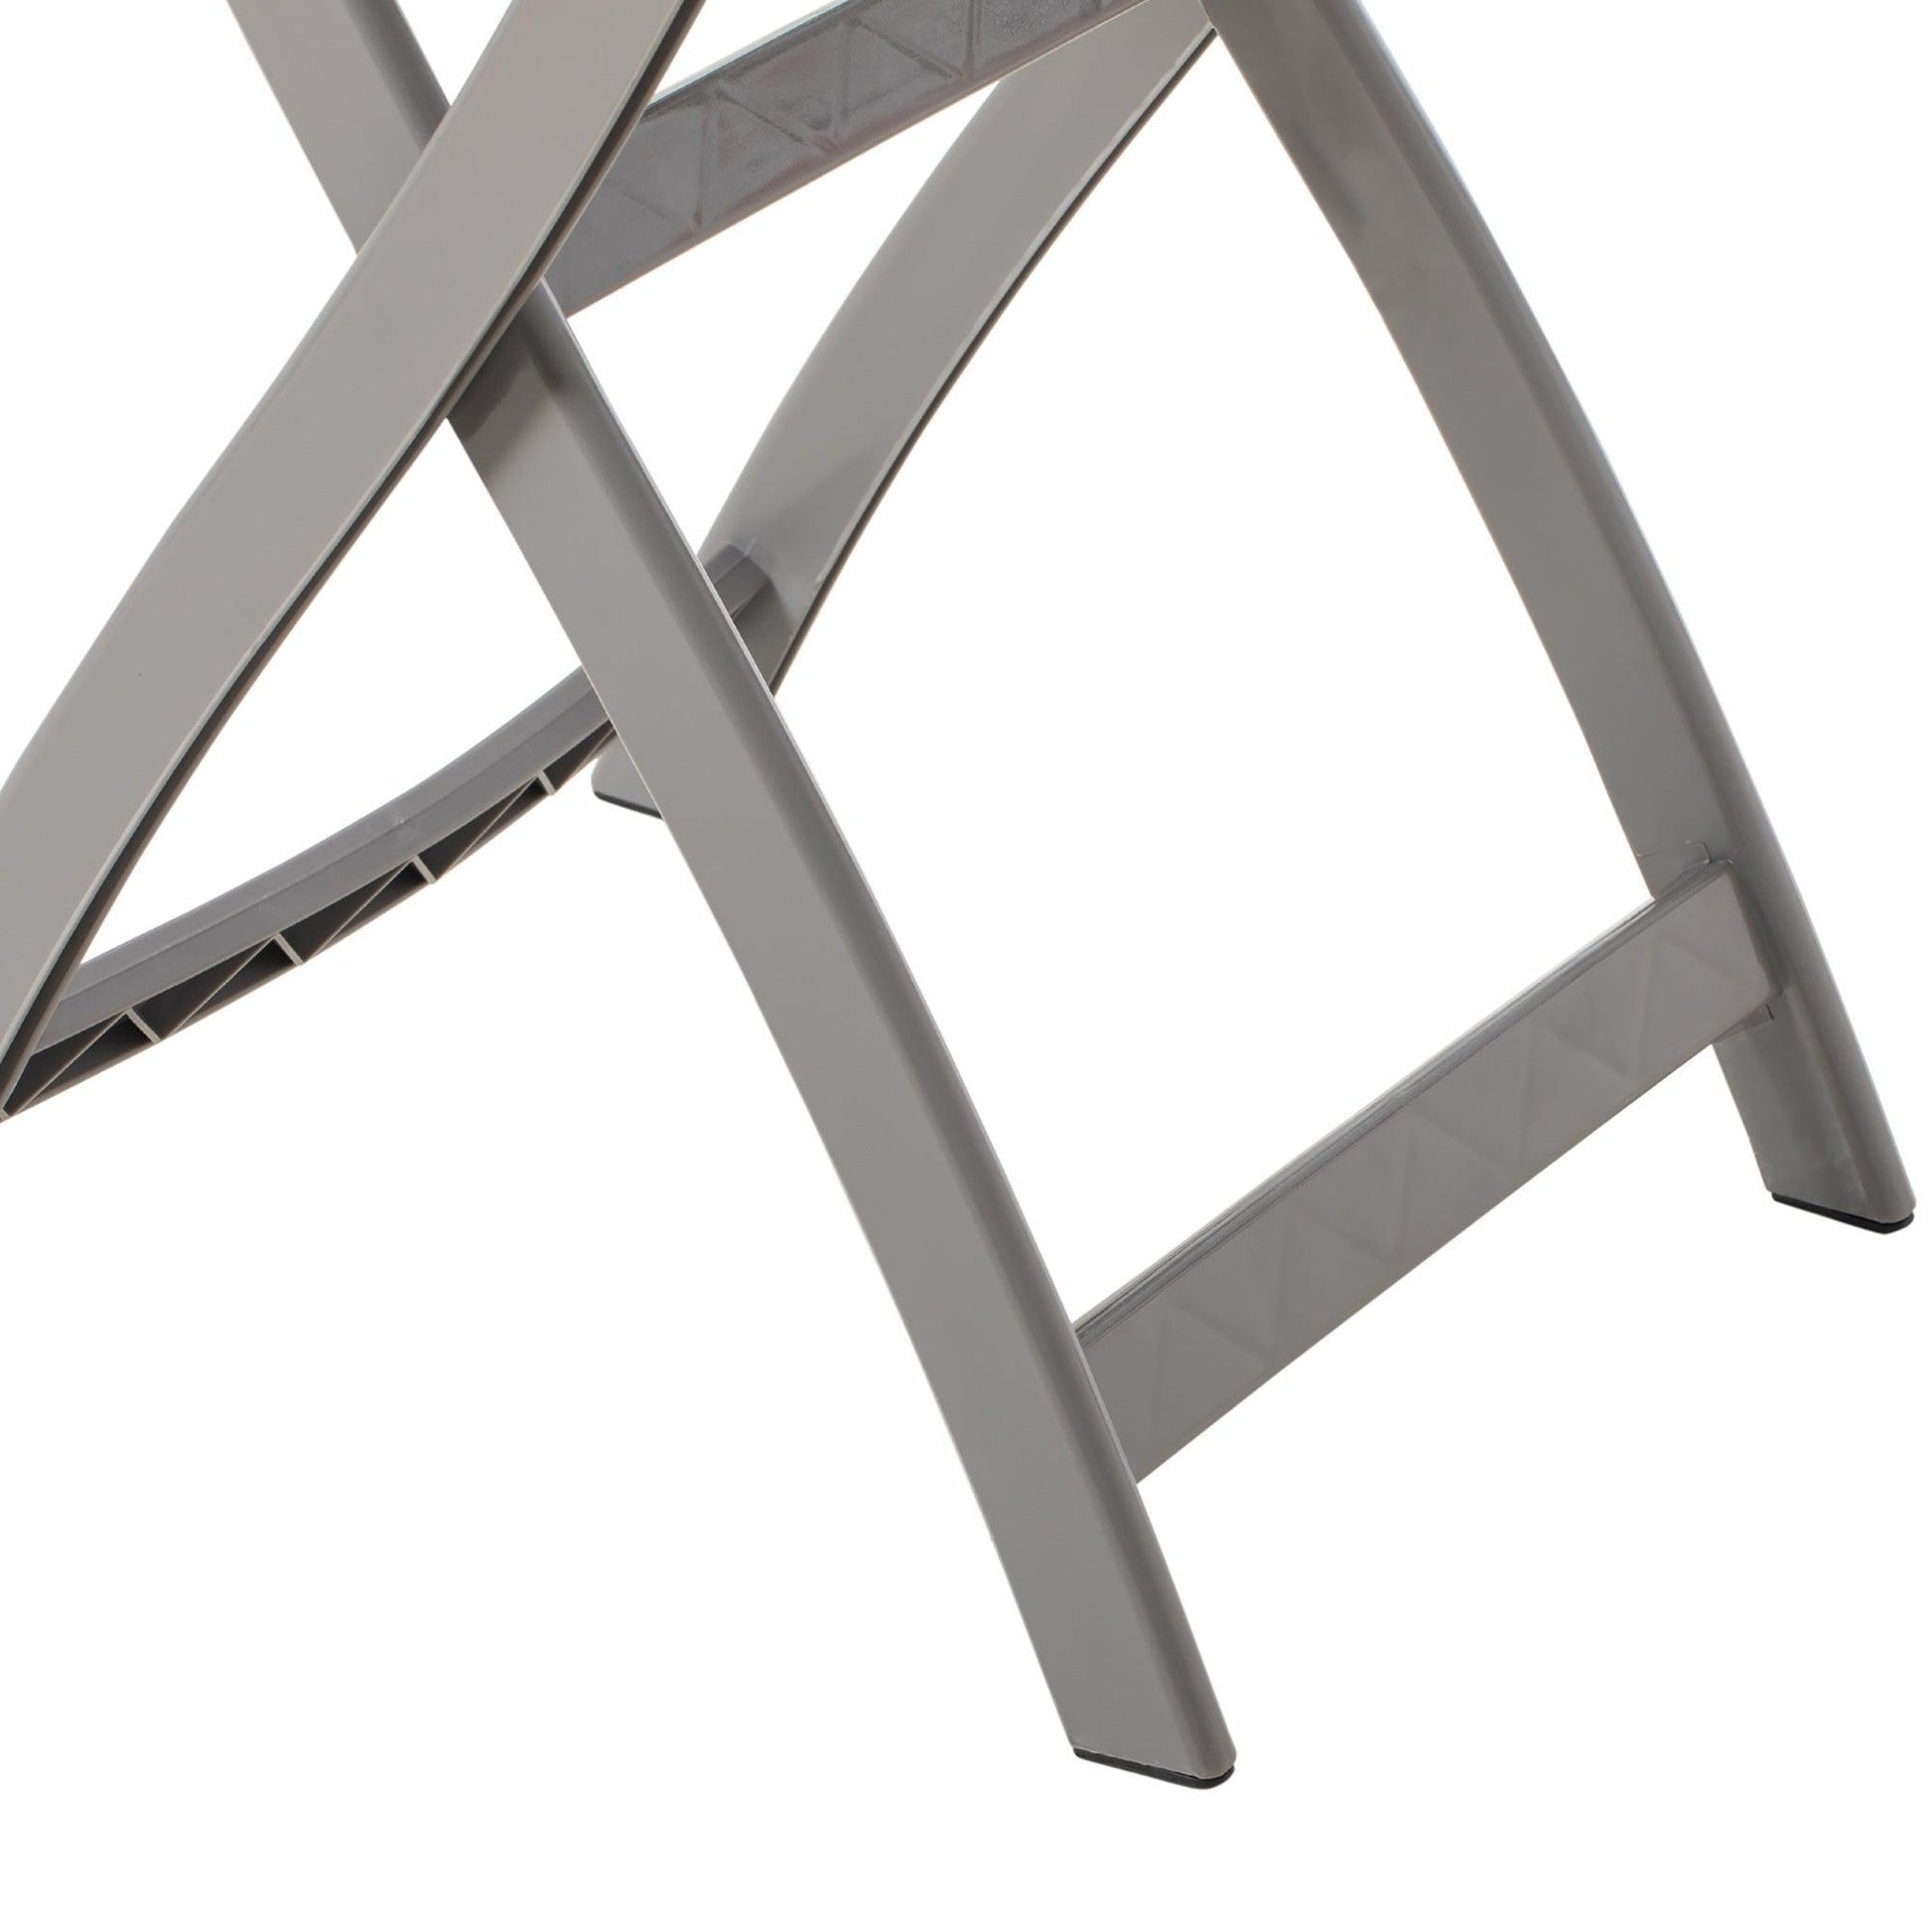 Outsunny Foldable Outsunny Grey Bistro Set: Table + Chairs - ALL4U RETAILER LTD